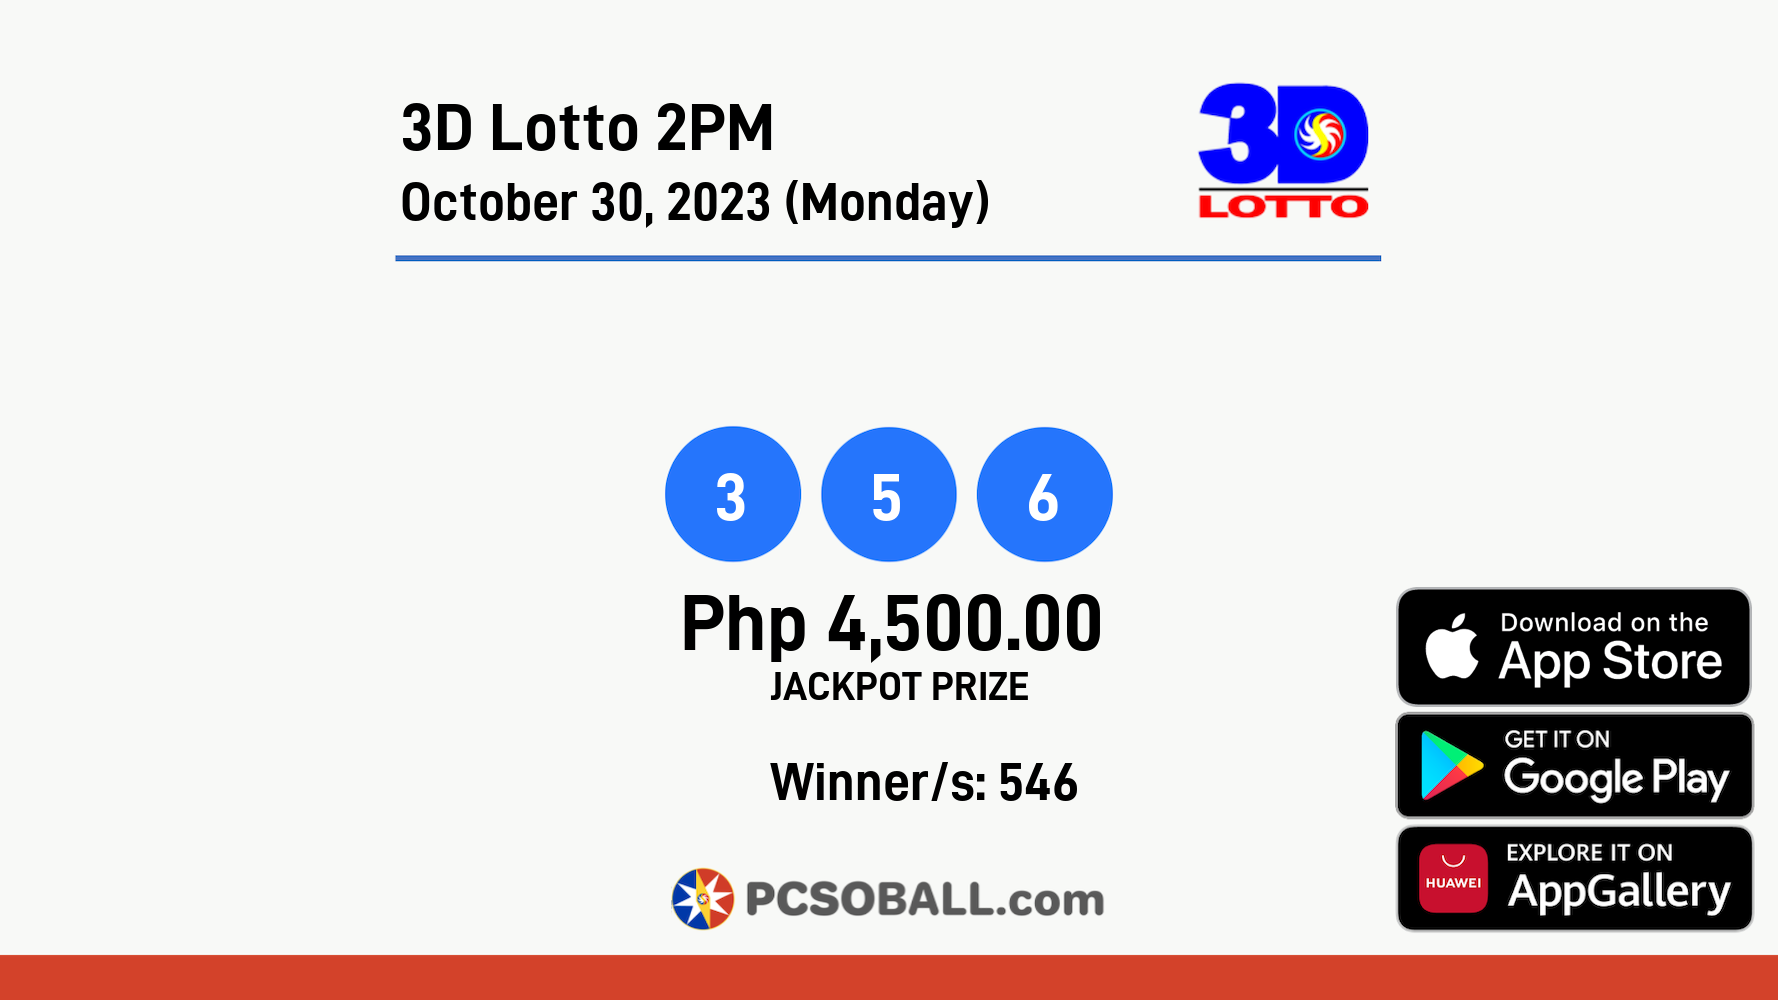 3D Lotto 2PM October 30, 2023 (Monday) Result